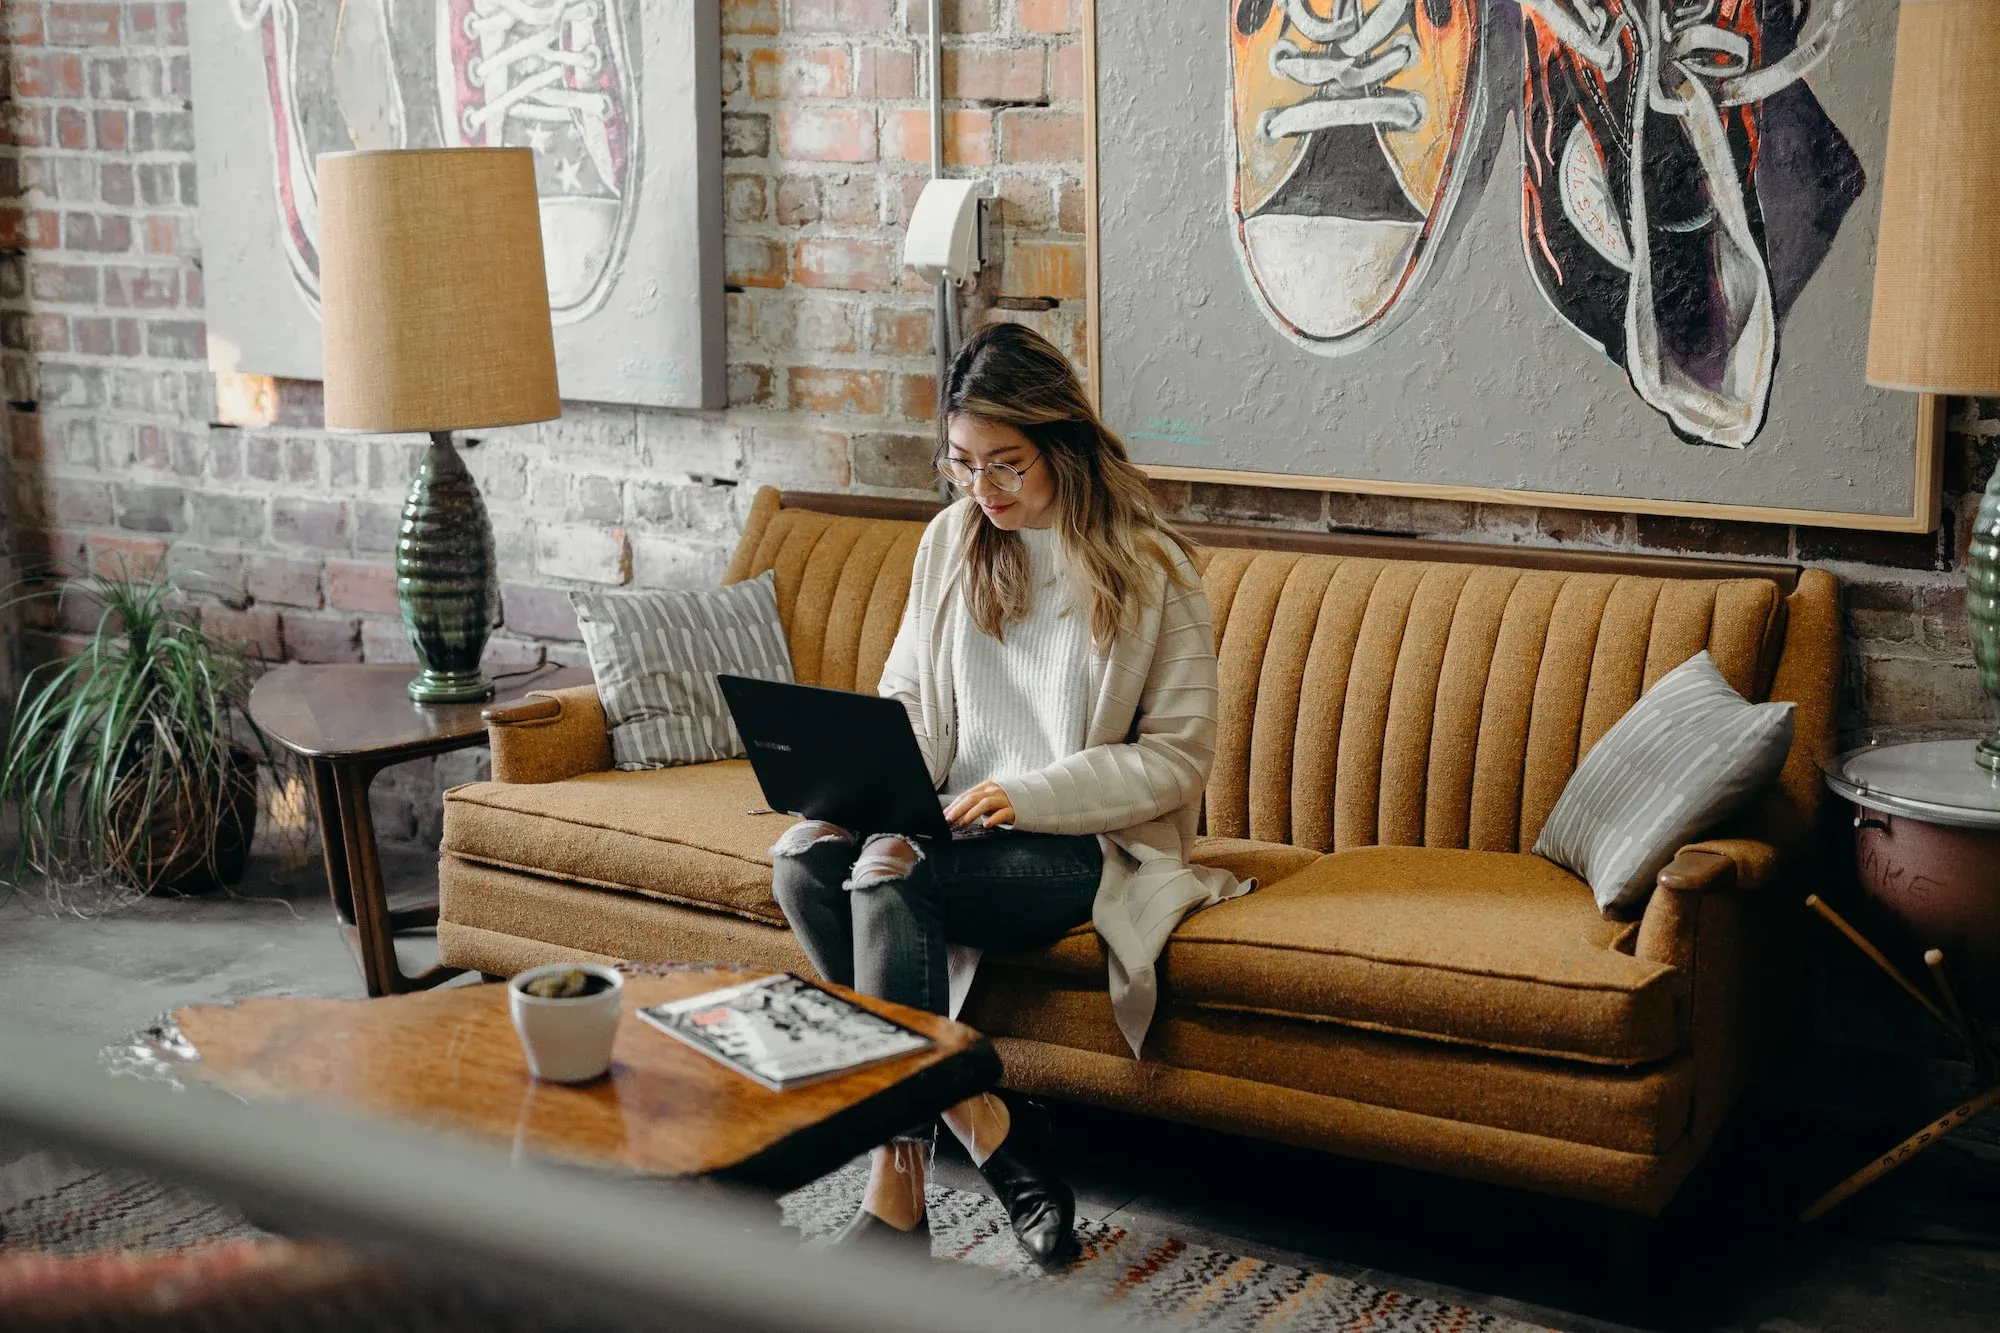 Image of a remote worker in a cafe setting